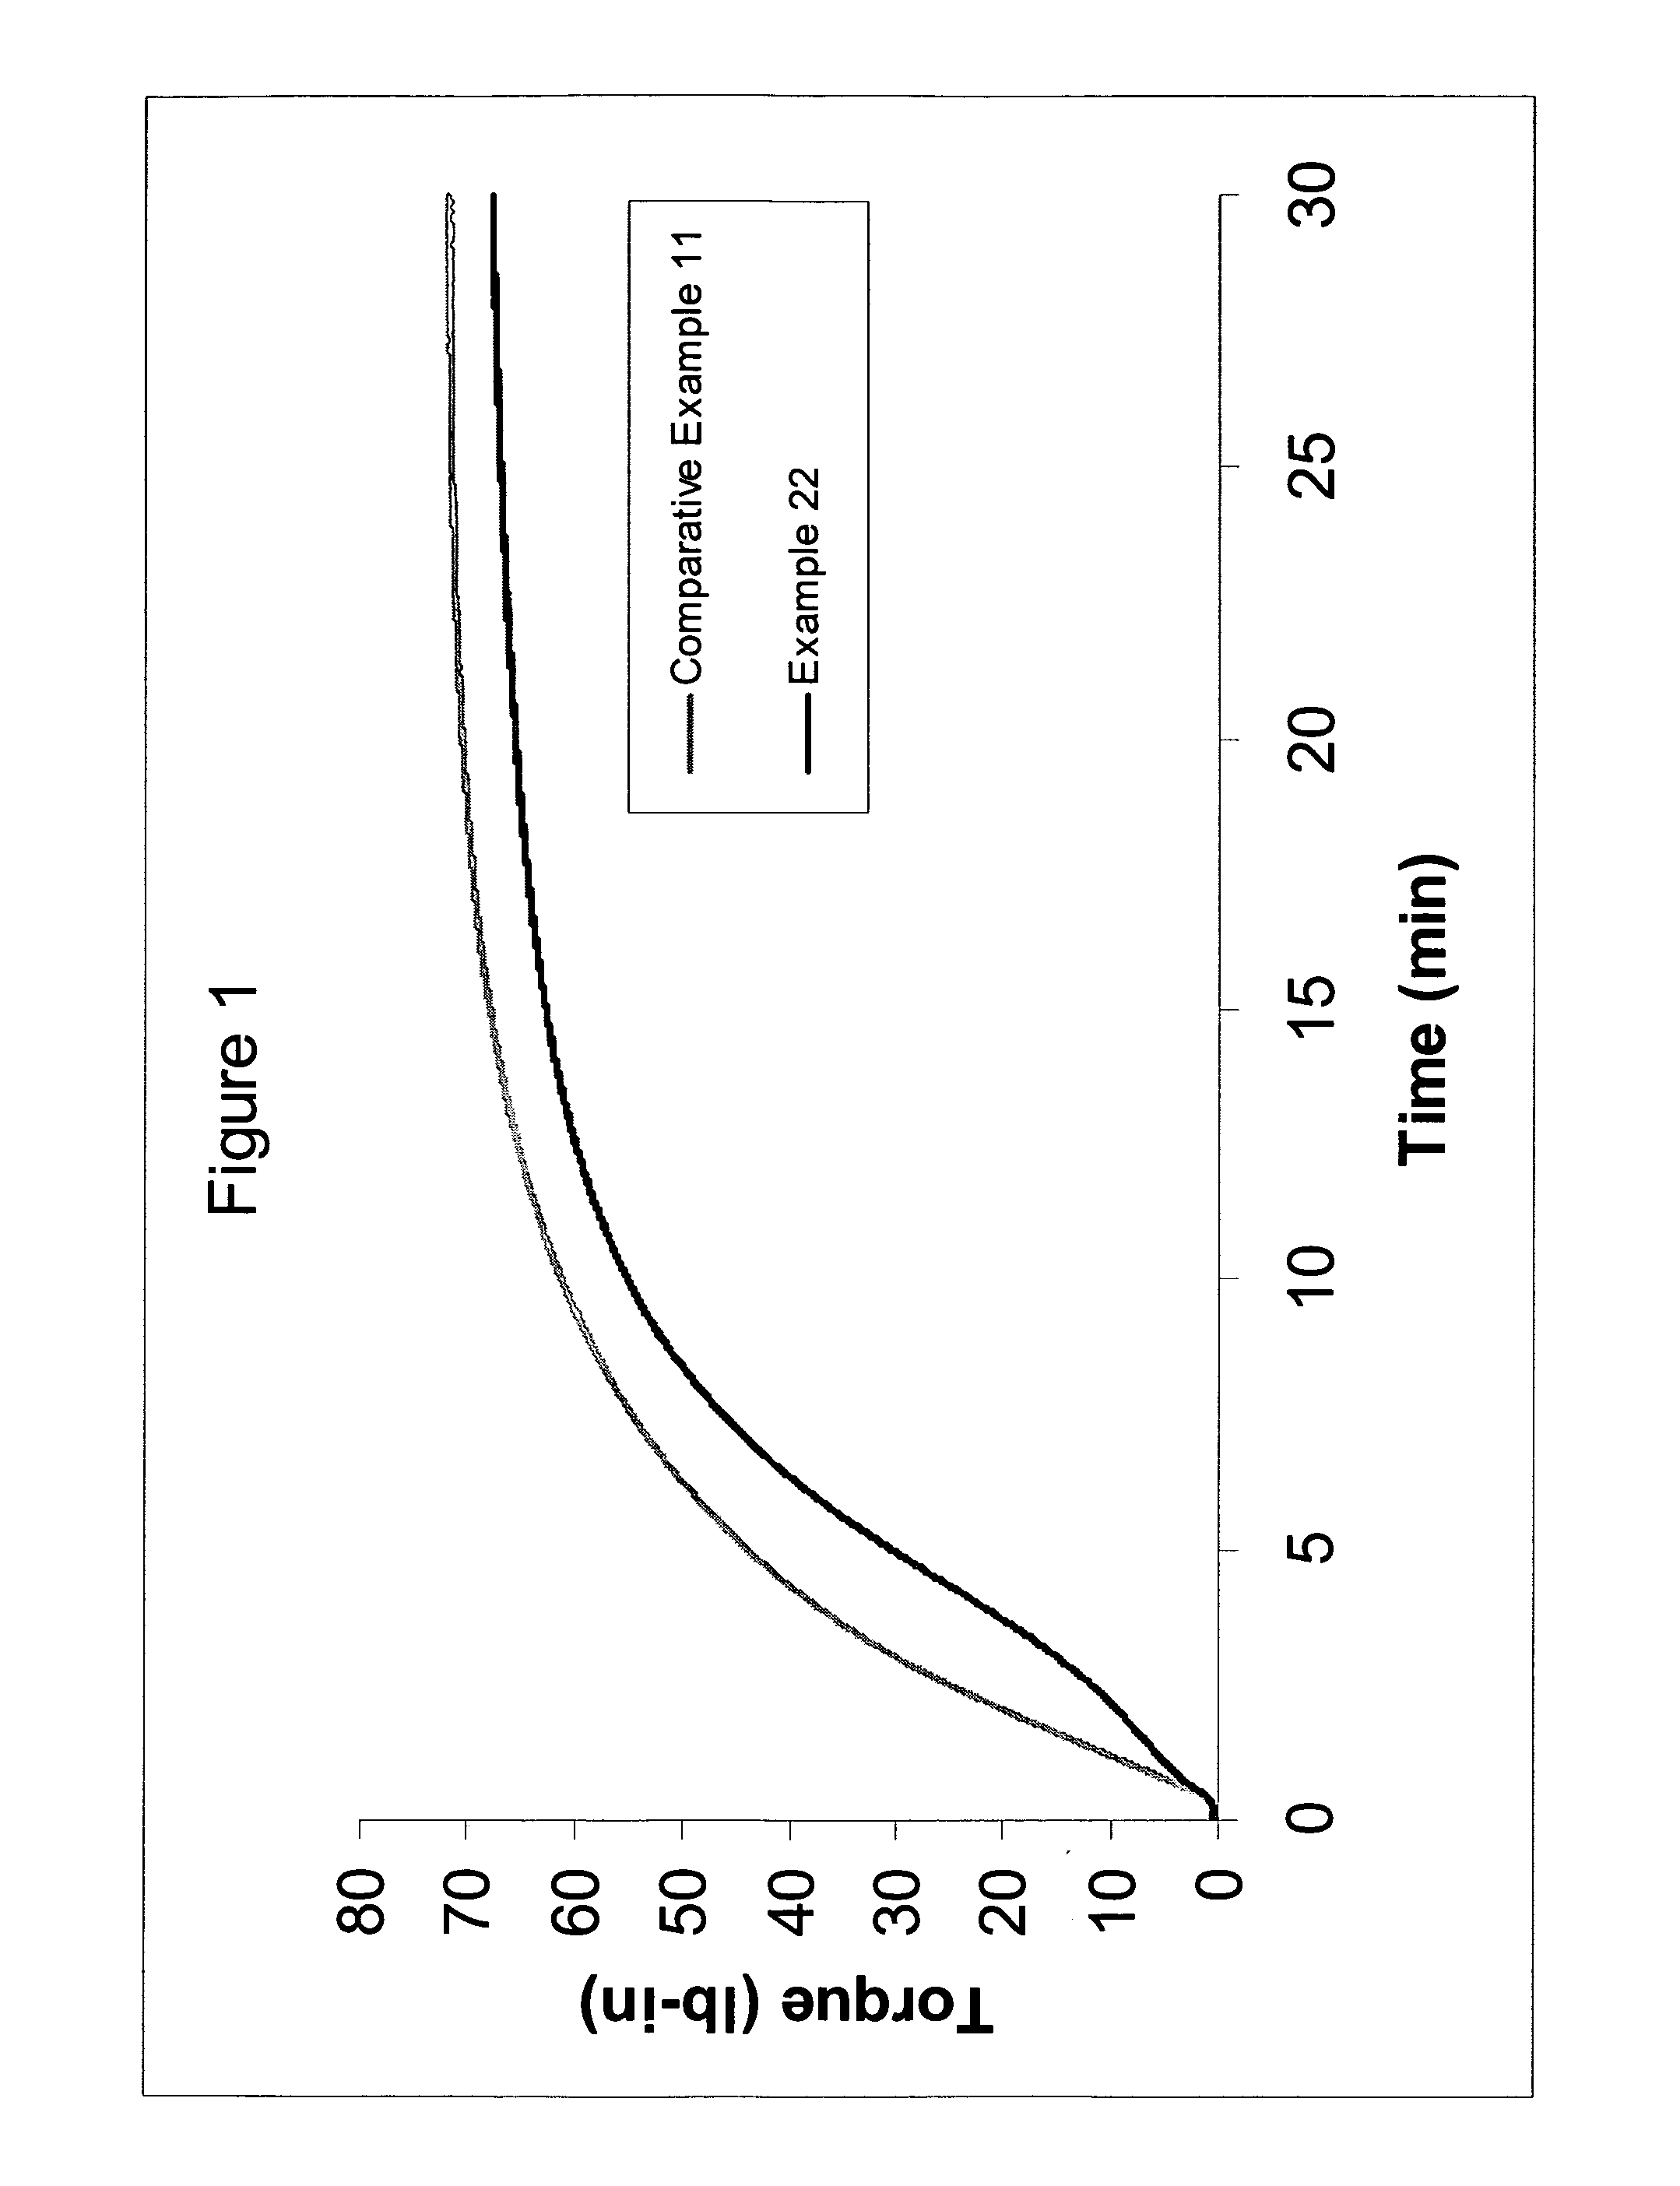 Rubber compositions comprising hydroquinones and the use thereof in golf balls